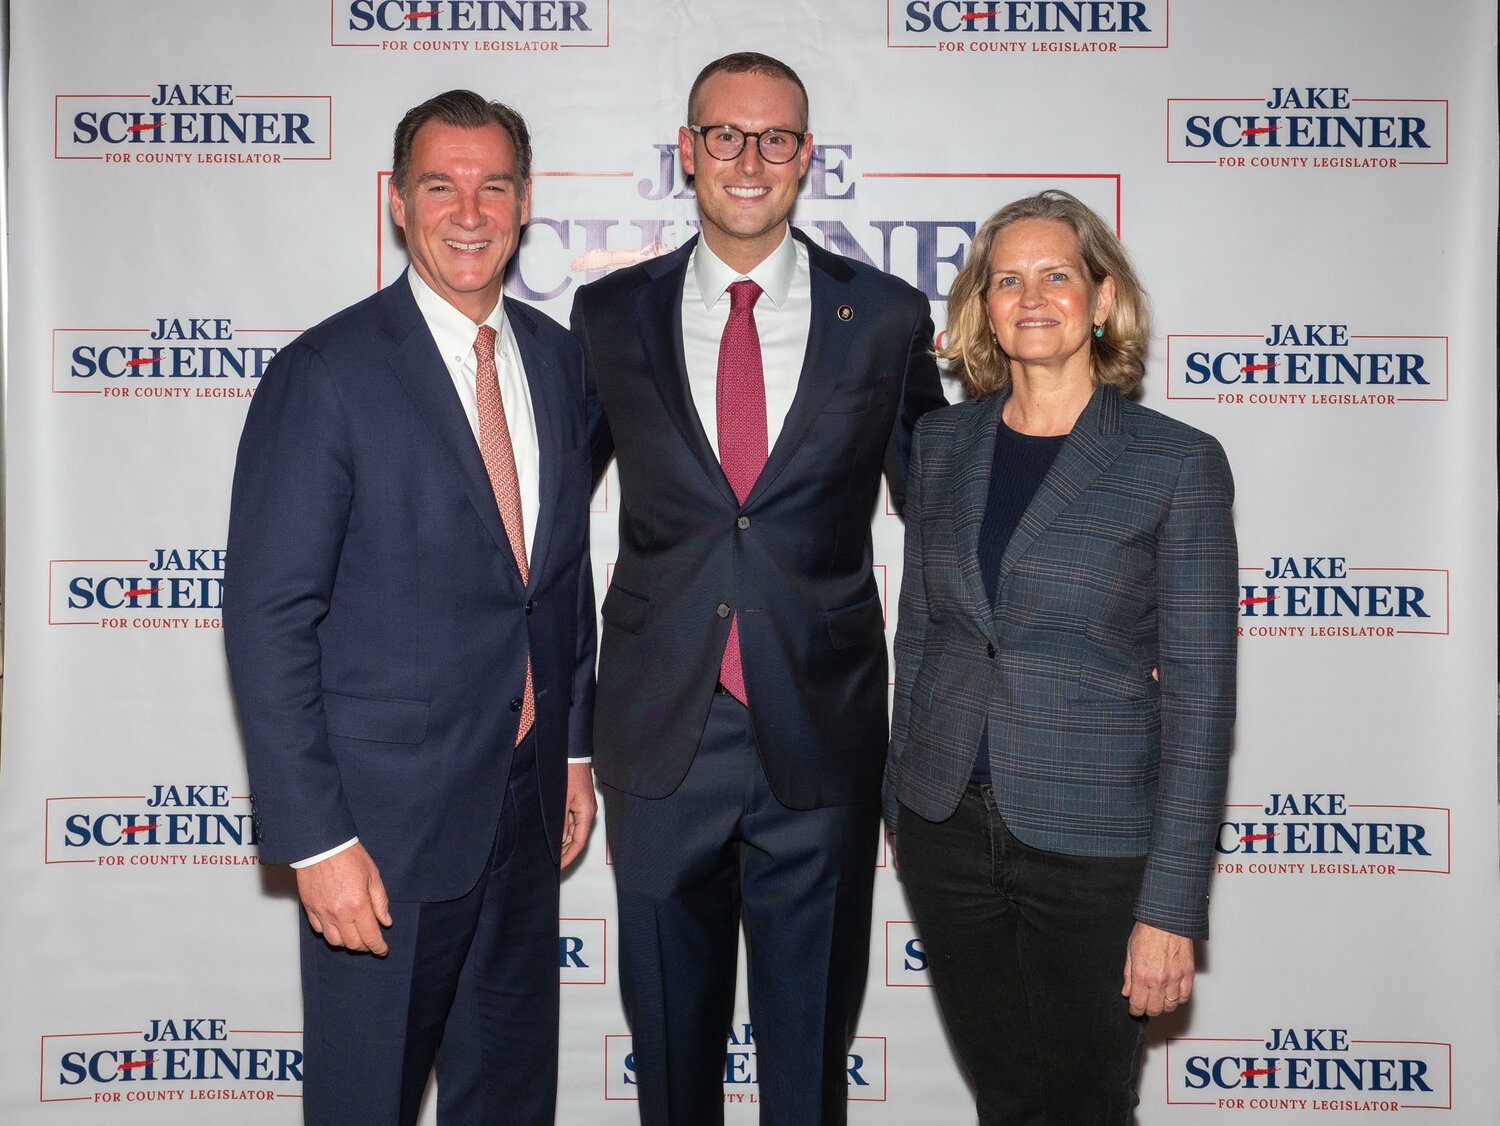 Scheiner has been endorsed by former Nassau County Executives Thomas Suozzi, left, and Laura Curran.